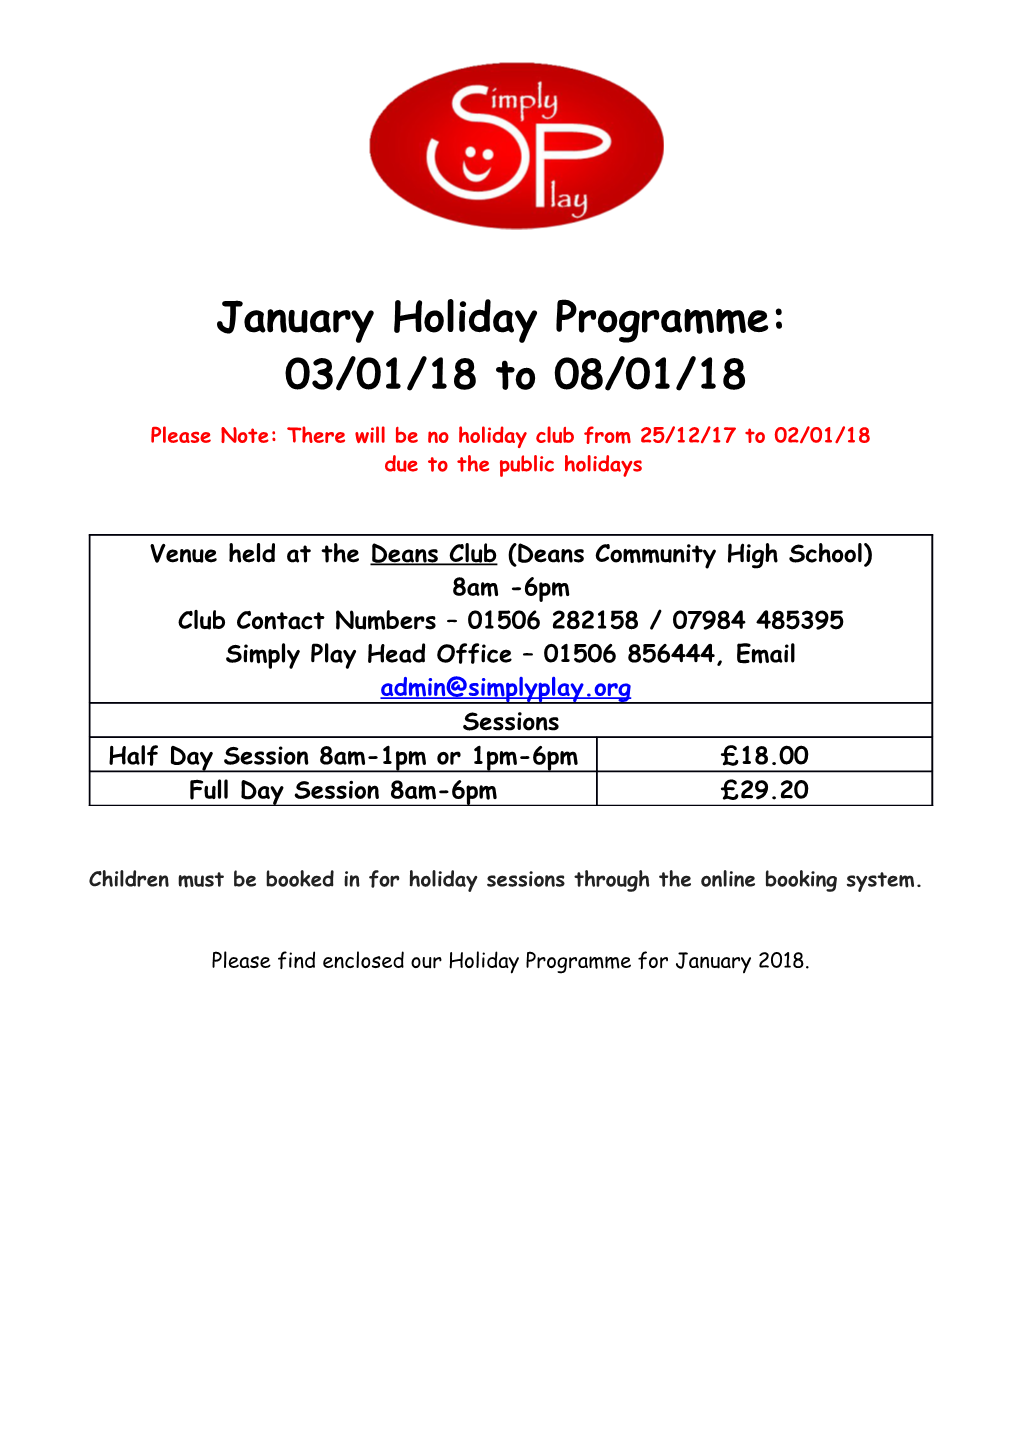 Please Note: There Will Be No Holiday Club from 25/12/17 to 02/01/18